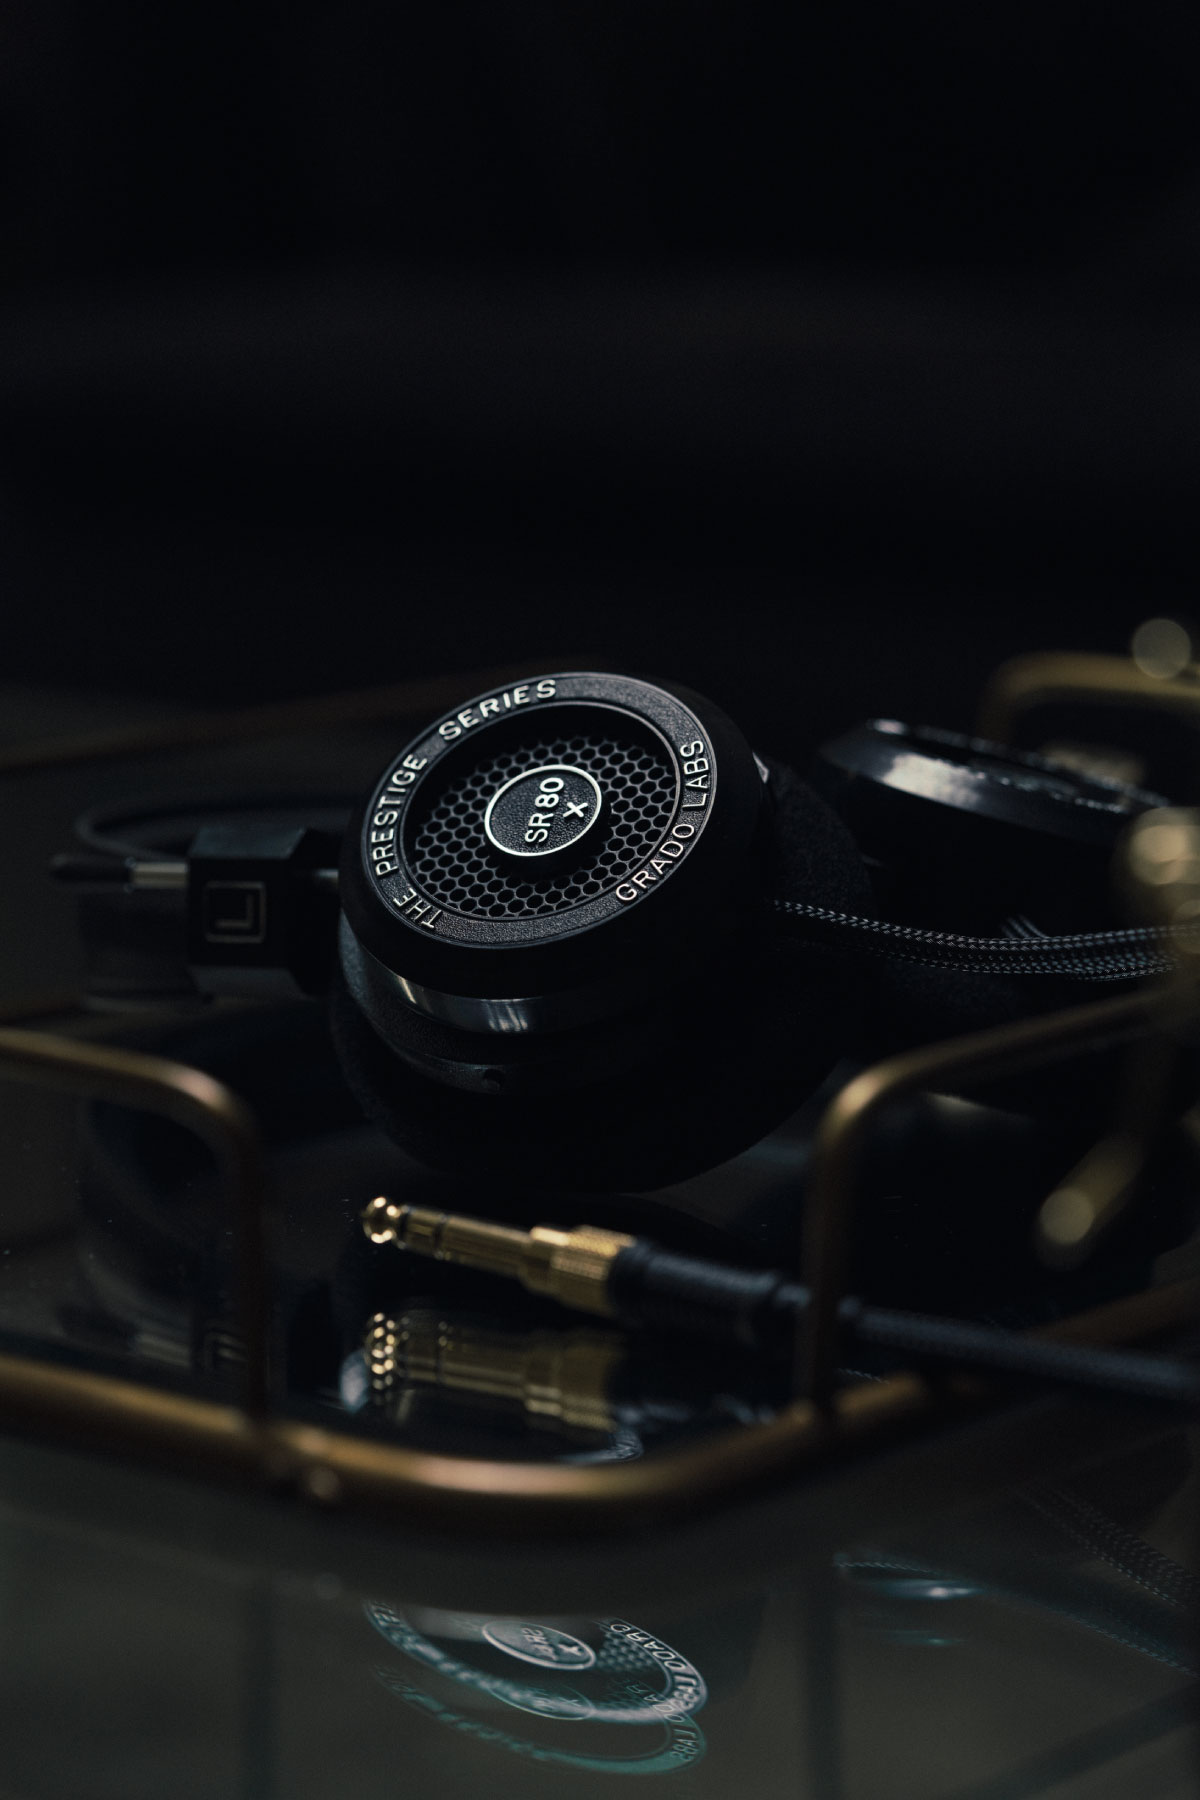 Photo of SR80x headphones resting on a reflective black table with an audio cable resting in front of the headphones